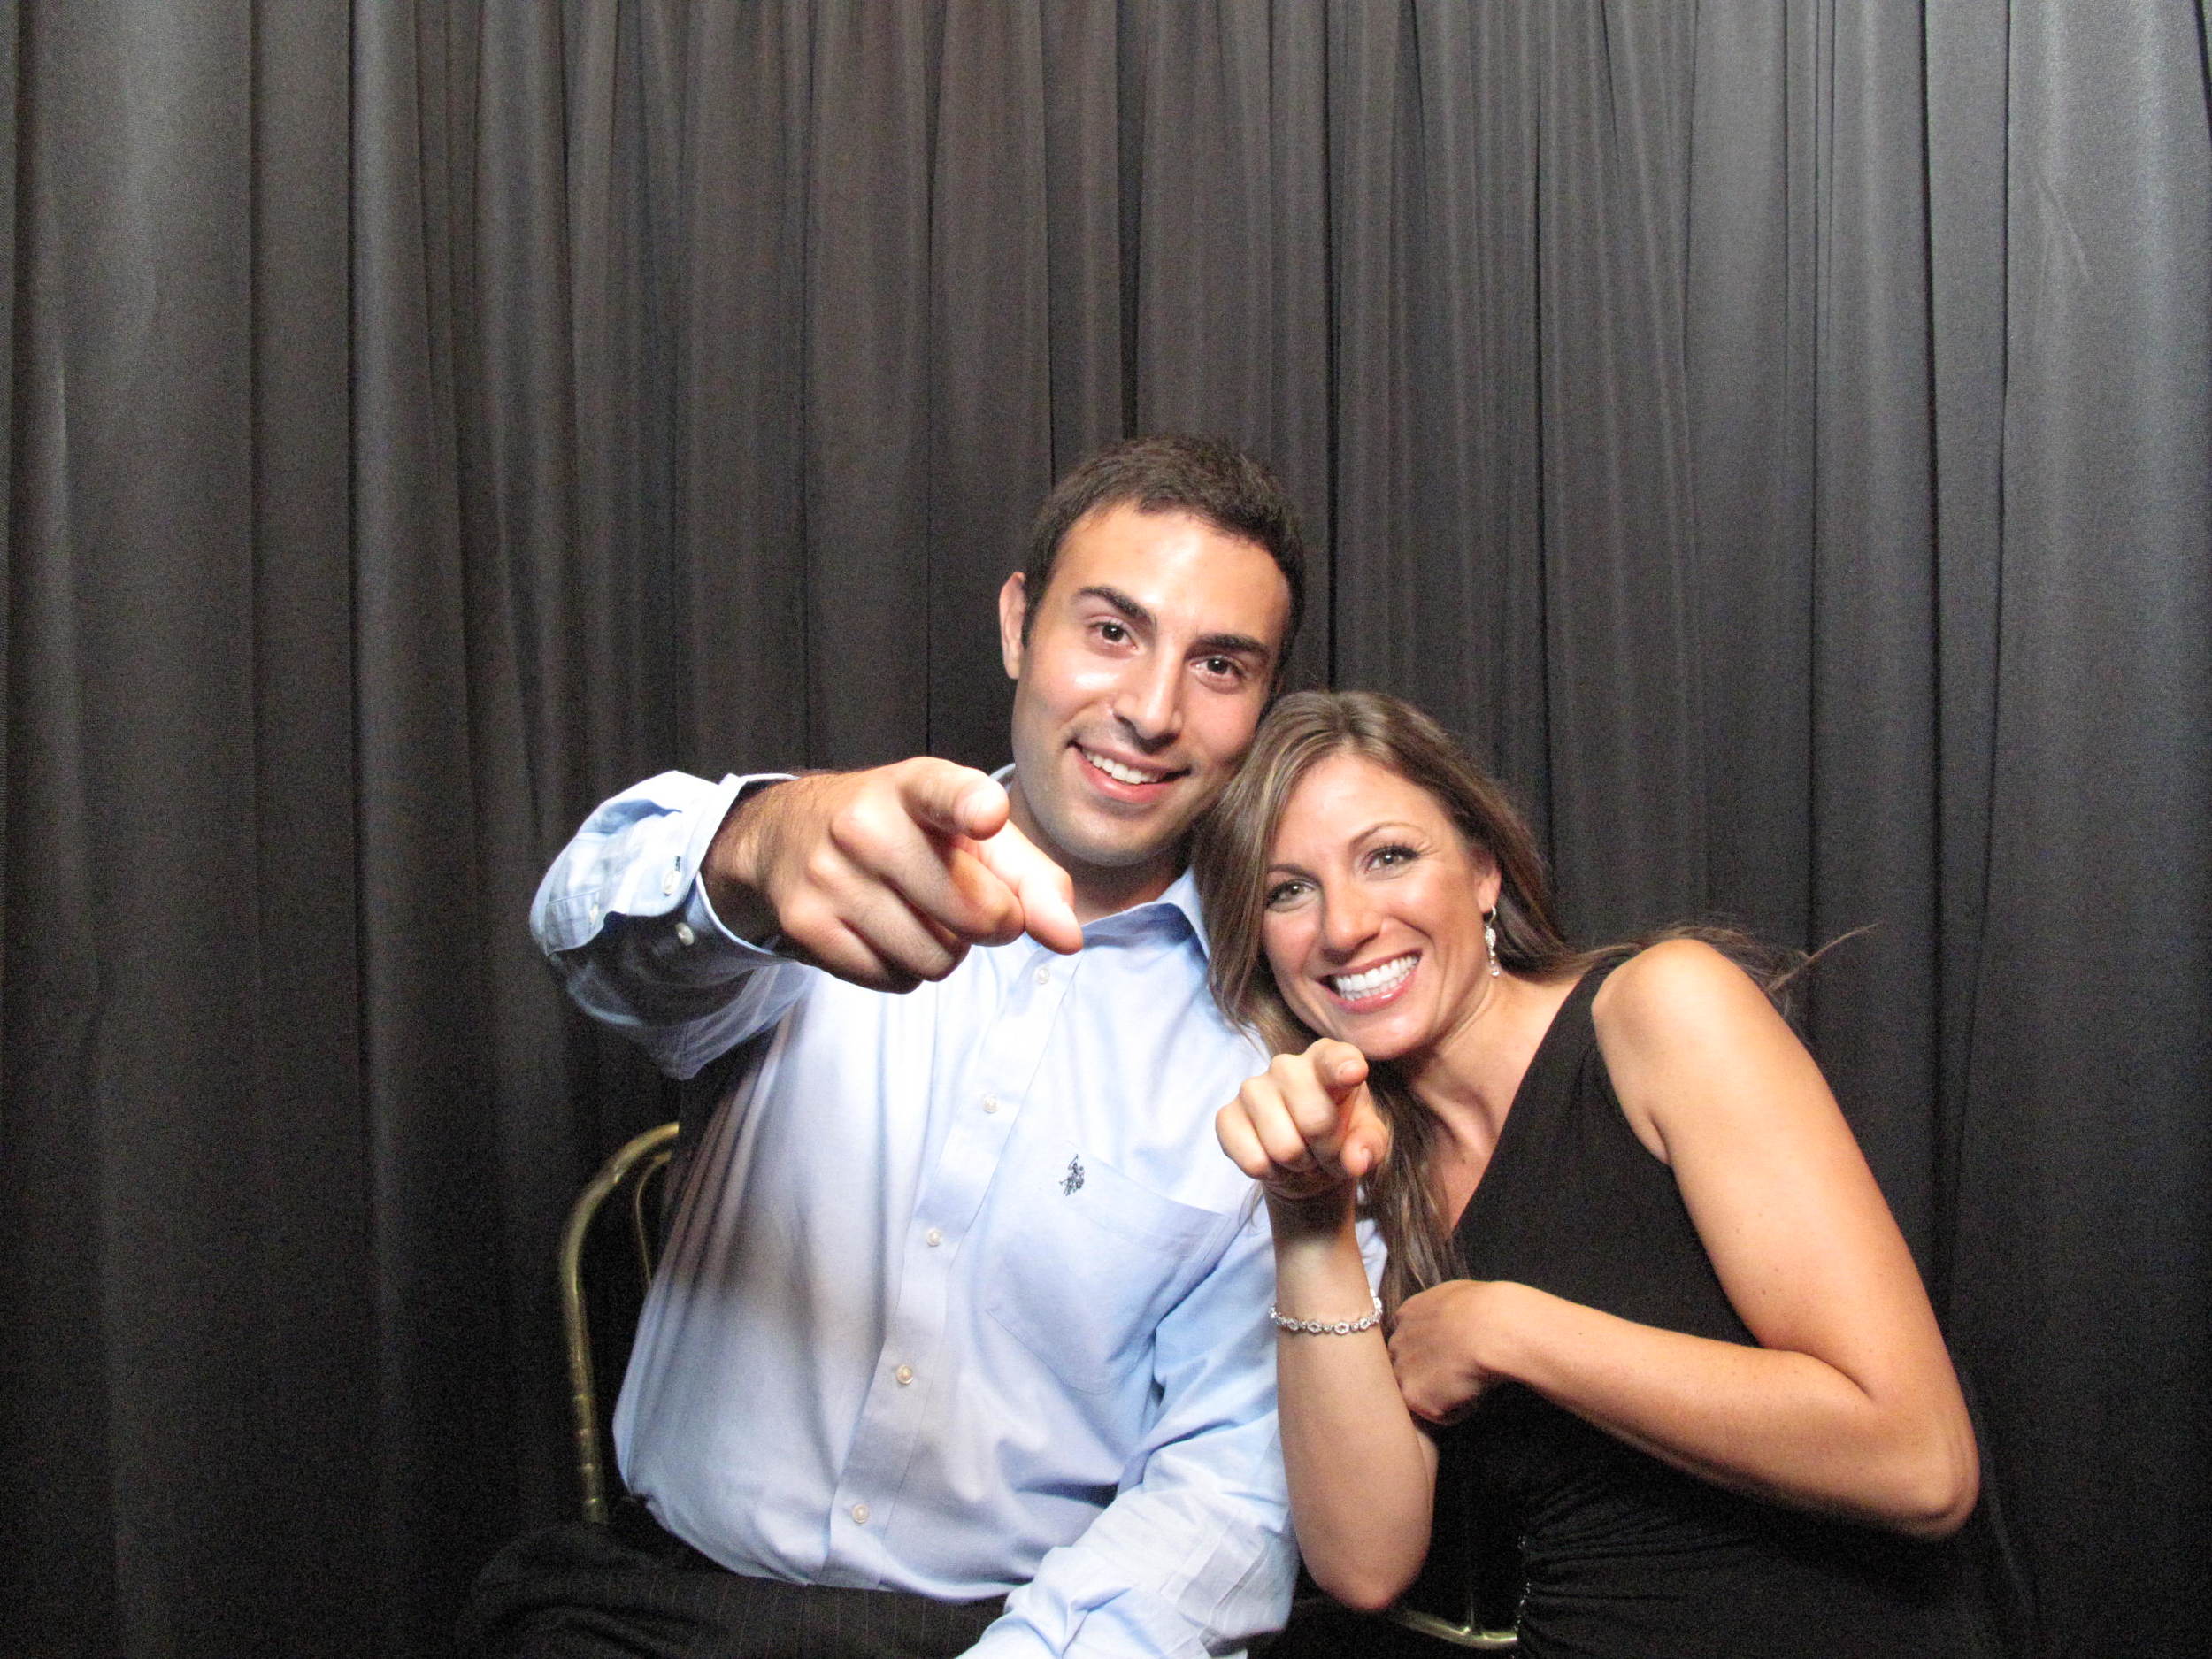 Snapshot Photobooths at The Mill in Spring Lake, New Jersey